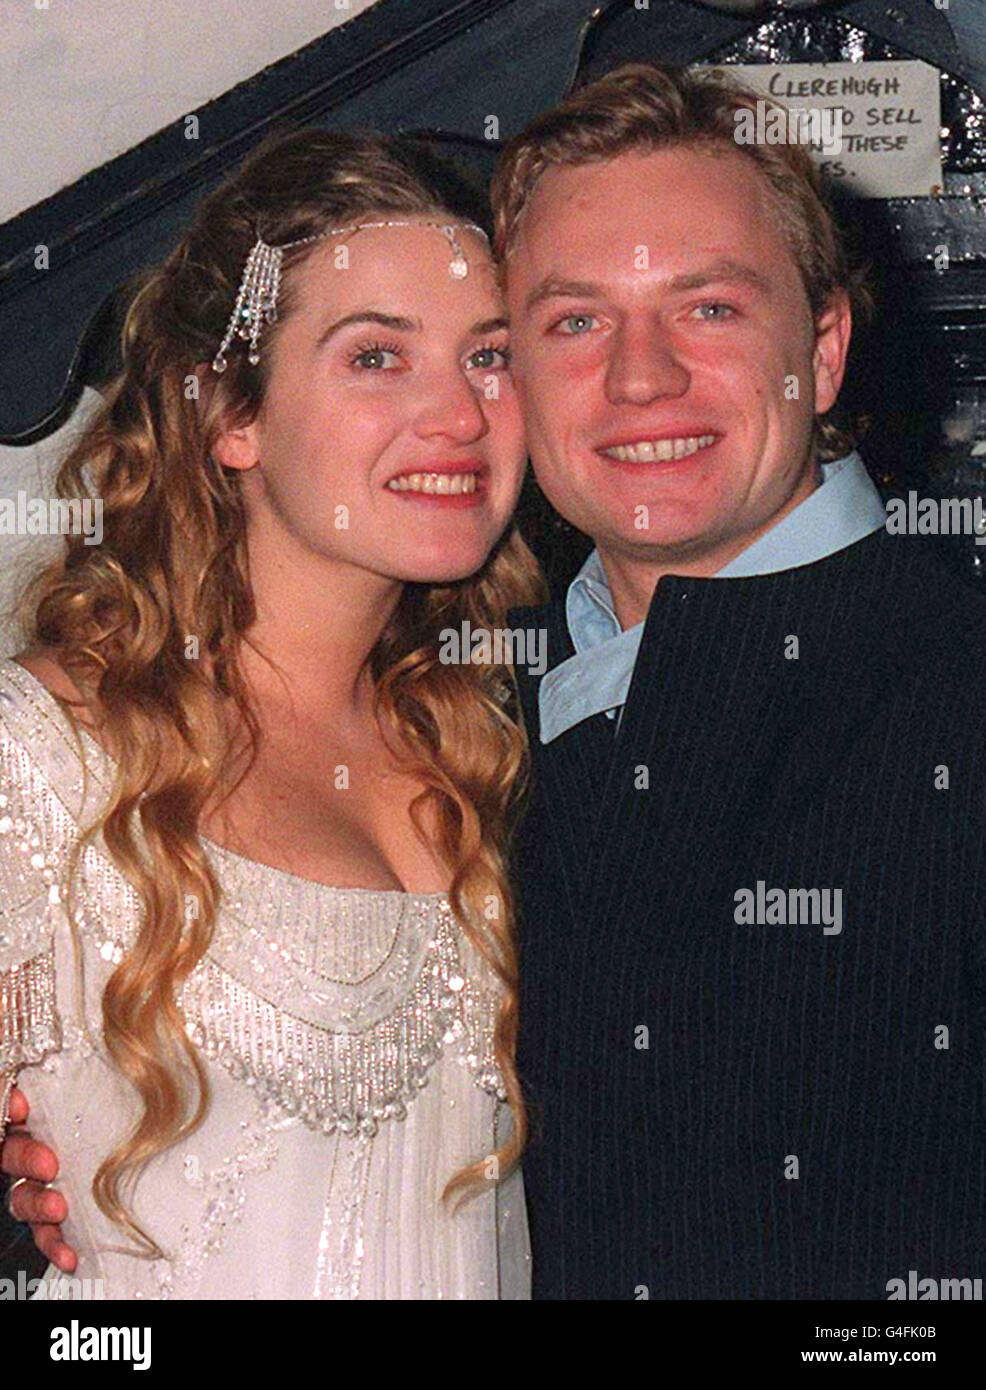 Actress Kate Winslet and new husband Jim Threapleton at their wedding reception in the Crooked Billet pub in Stoke Row, * 3/9/01: Movie star Winslet and husband Threapleton are separating, the